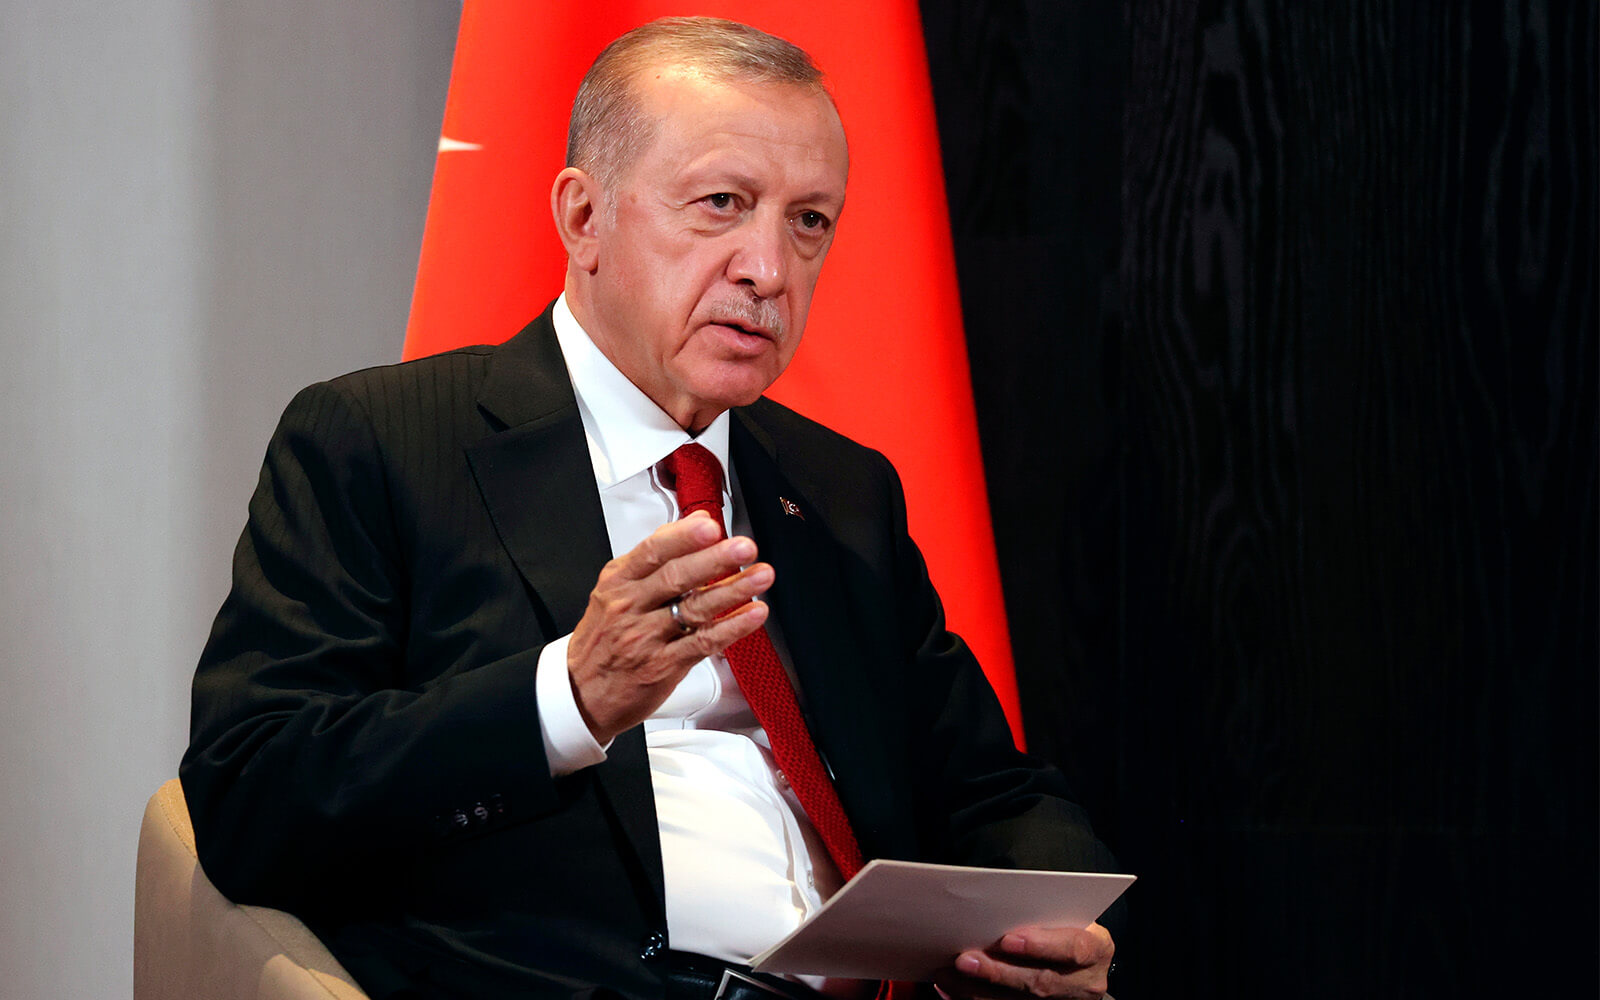 Lack of Cooperation Behind Failure to Secure “Lasting Peace” in Kashmir: Erdoğan